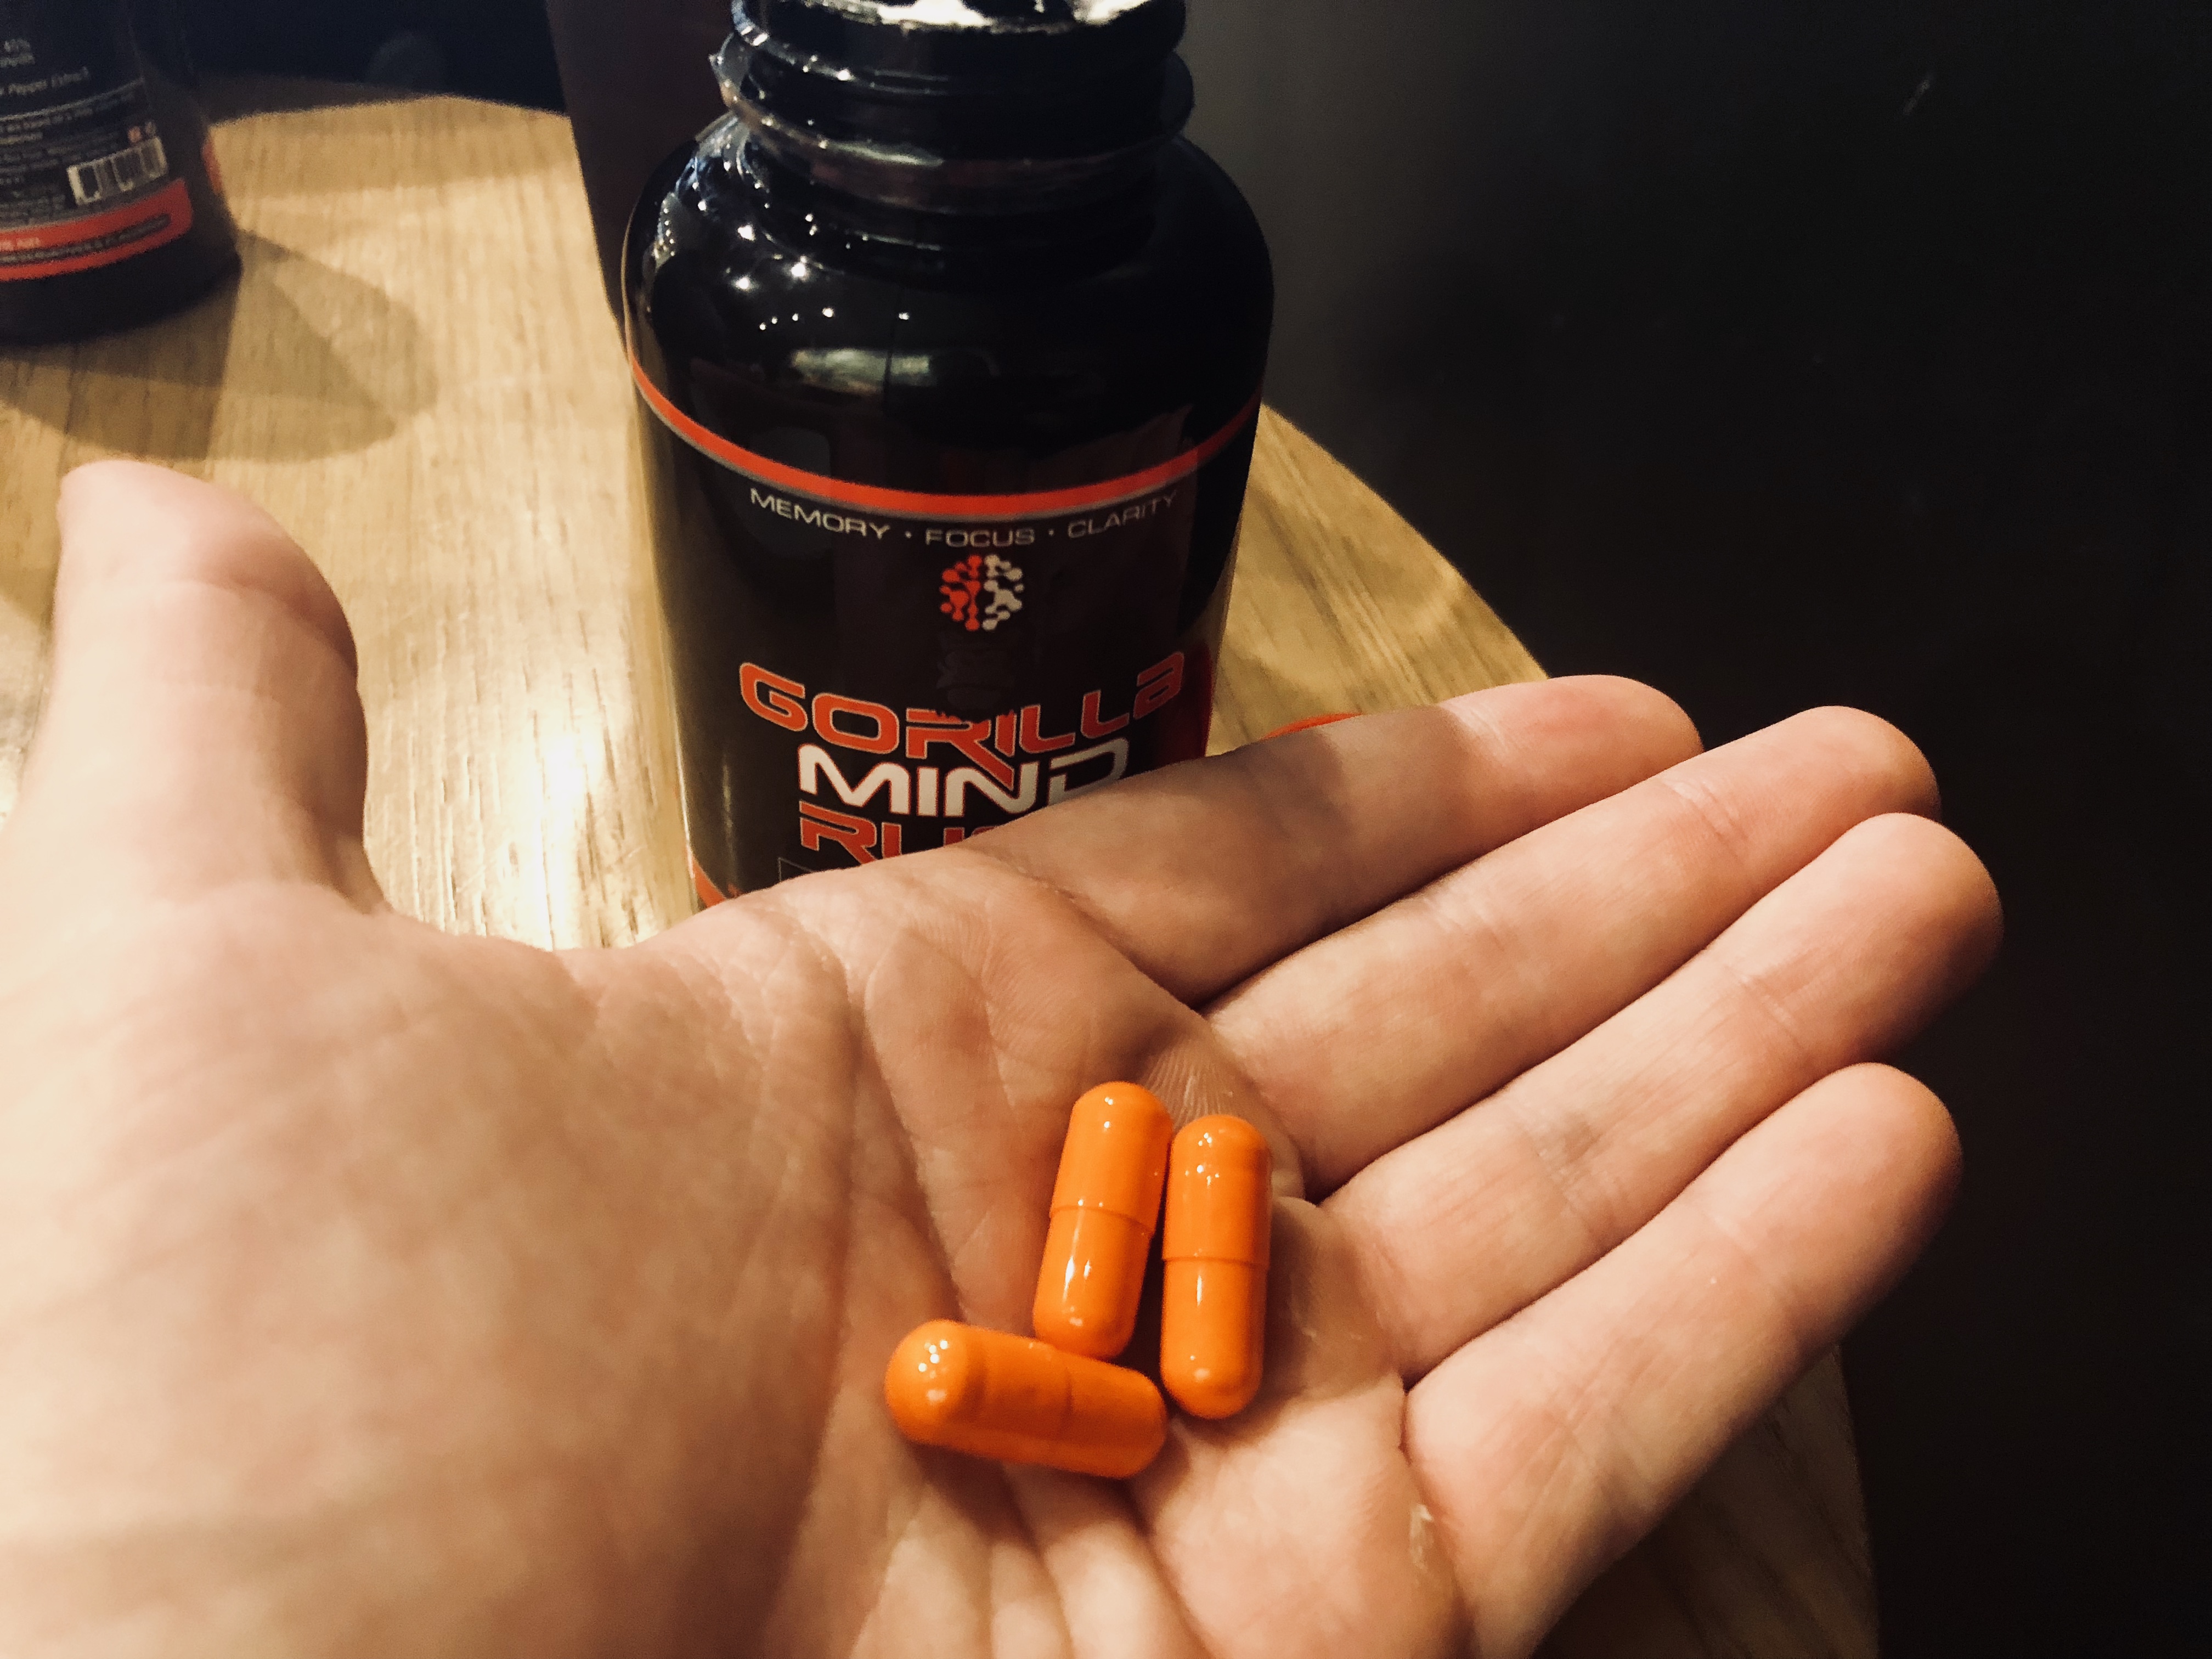 Gorilla Mind Rush and Smooth Nootropic Supplement Review - Benjamin McEvoy